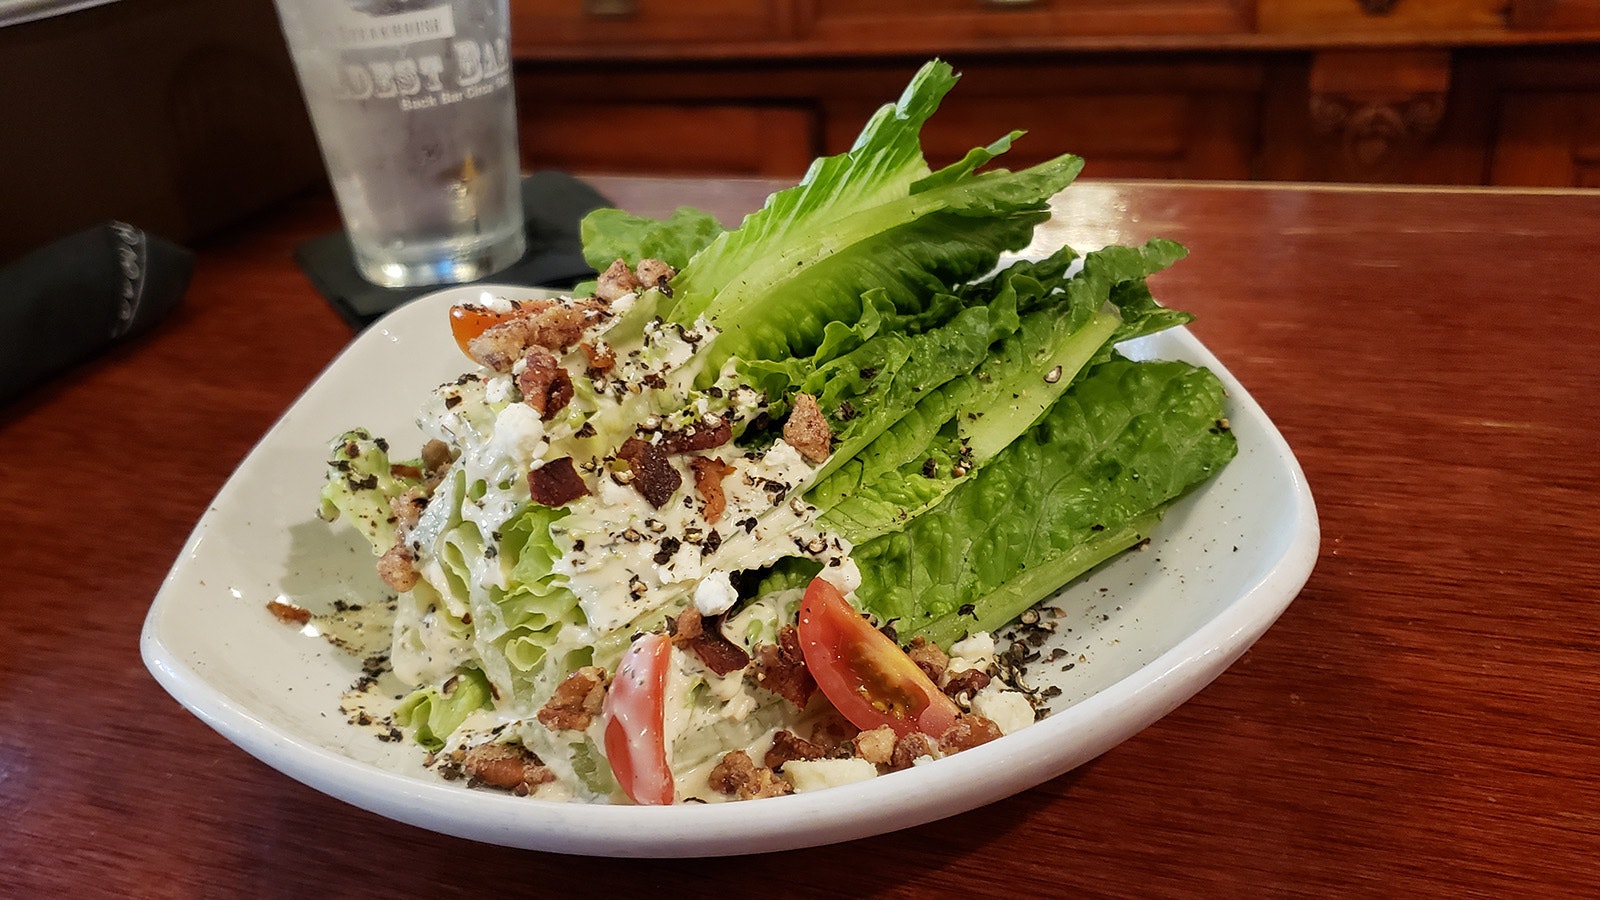 Blue cheese dressing on a romaine wedge salad with fresh tomato, candied bacon and nut crumbles.